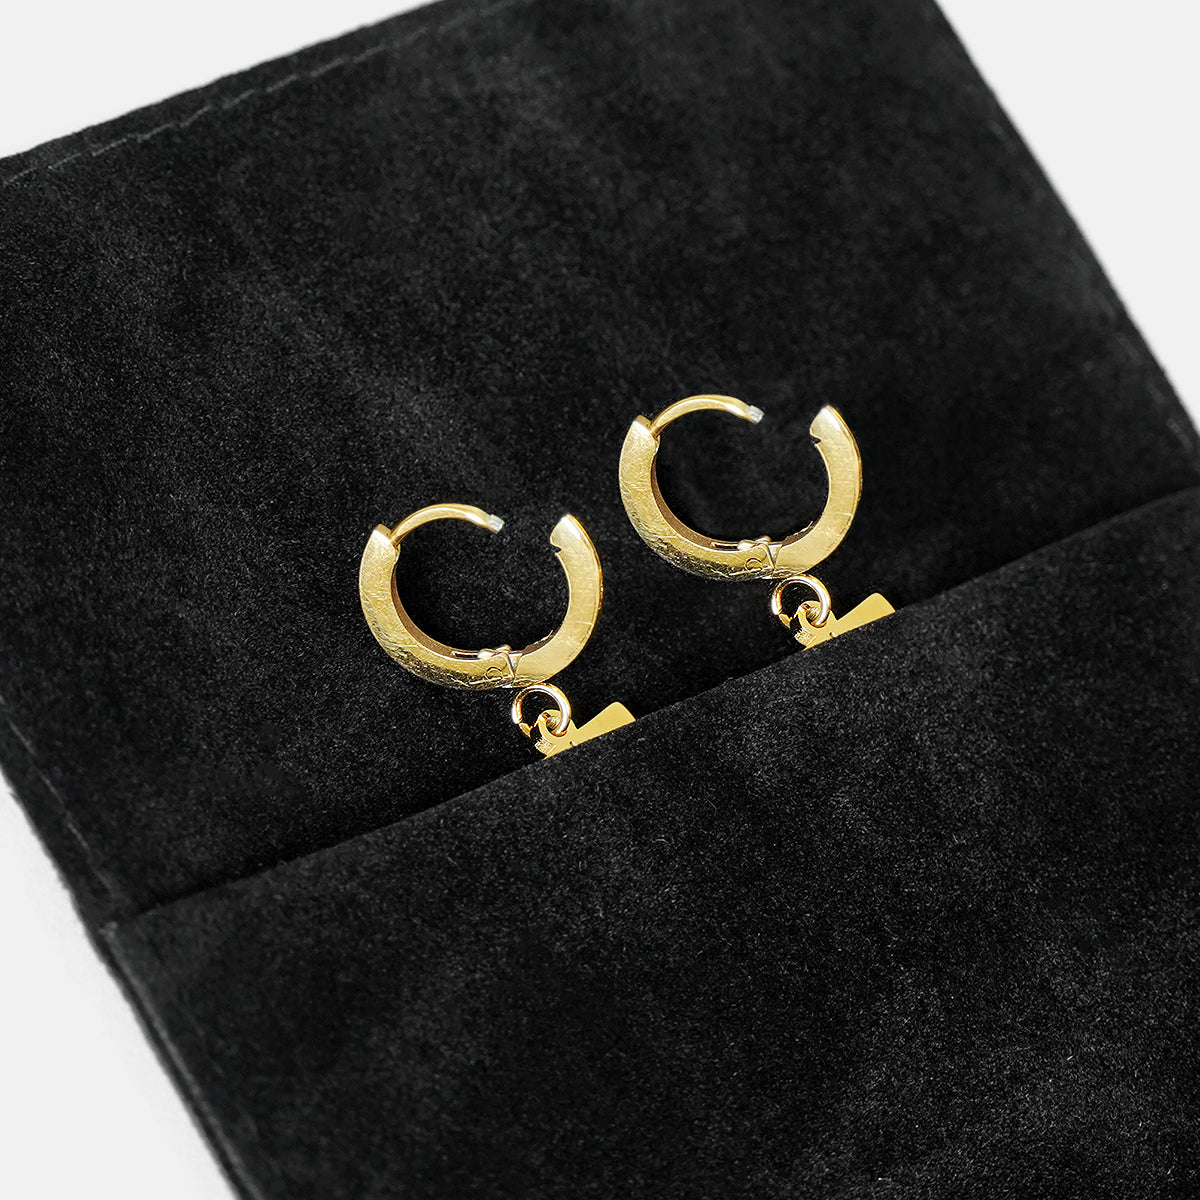 50 Number Earring - Gold Plated Stainless Steel